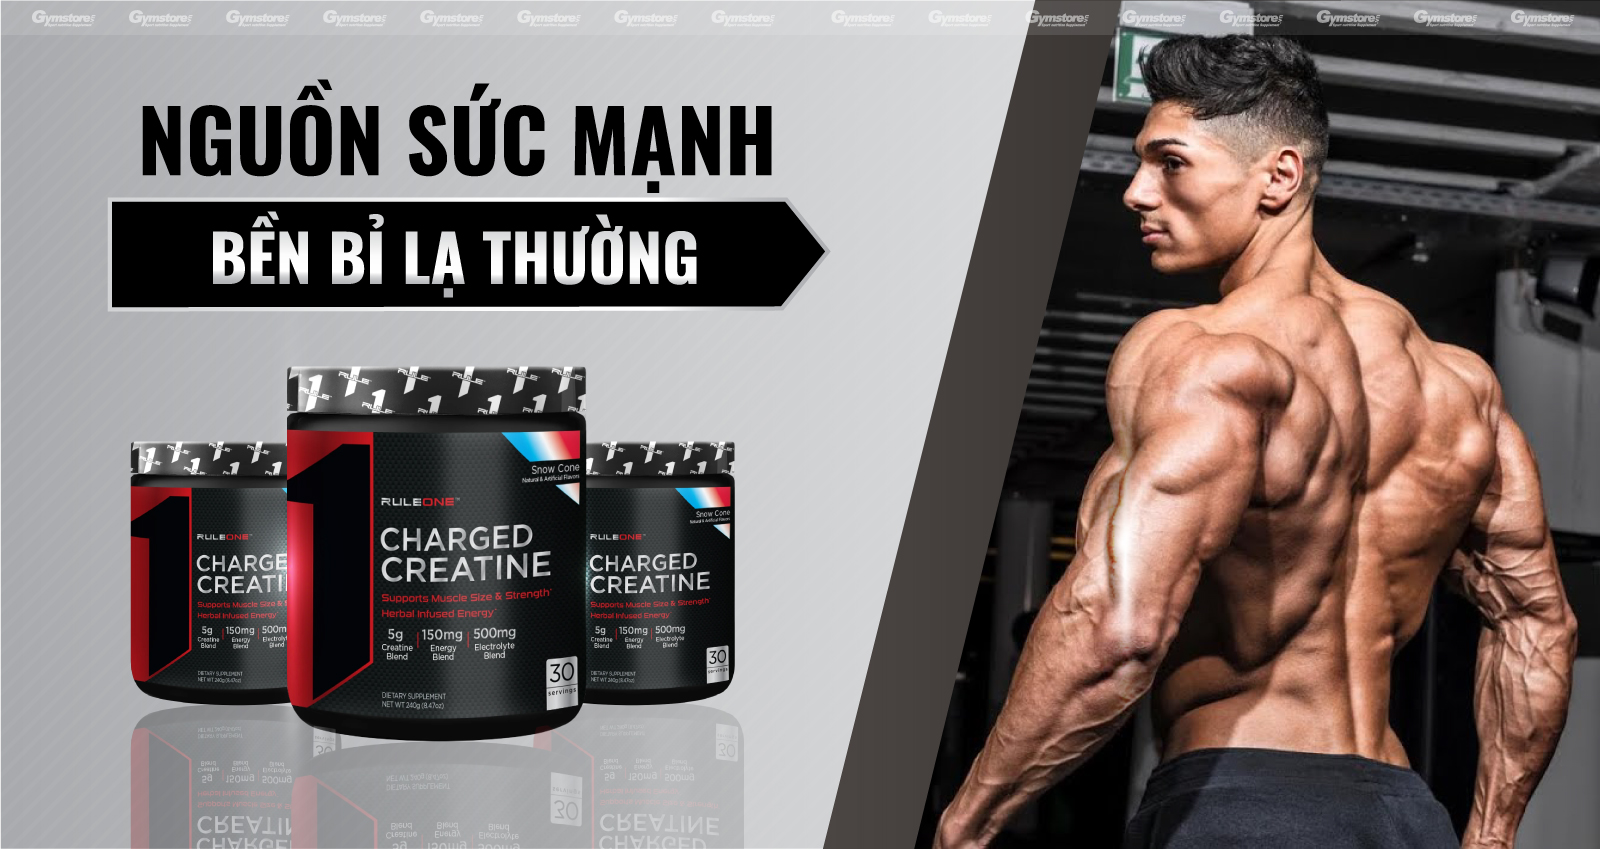 RULE1-CHARGED-CREATINE -gia-tang-suc-ben-tap-luyen-gymstore